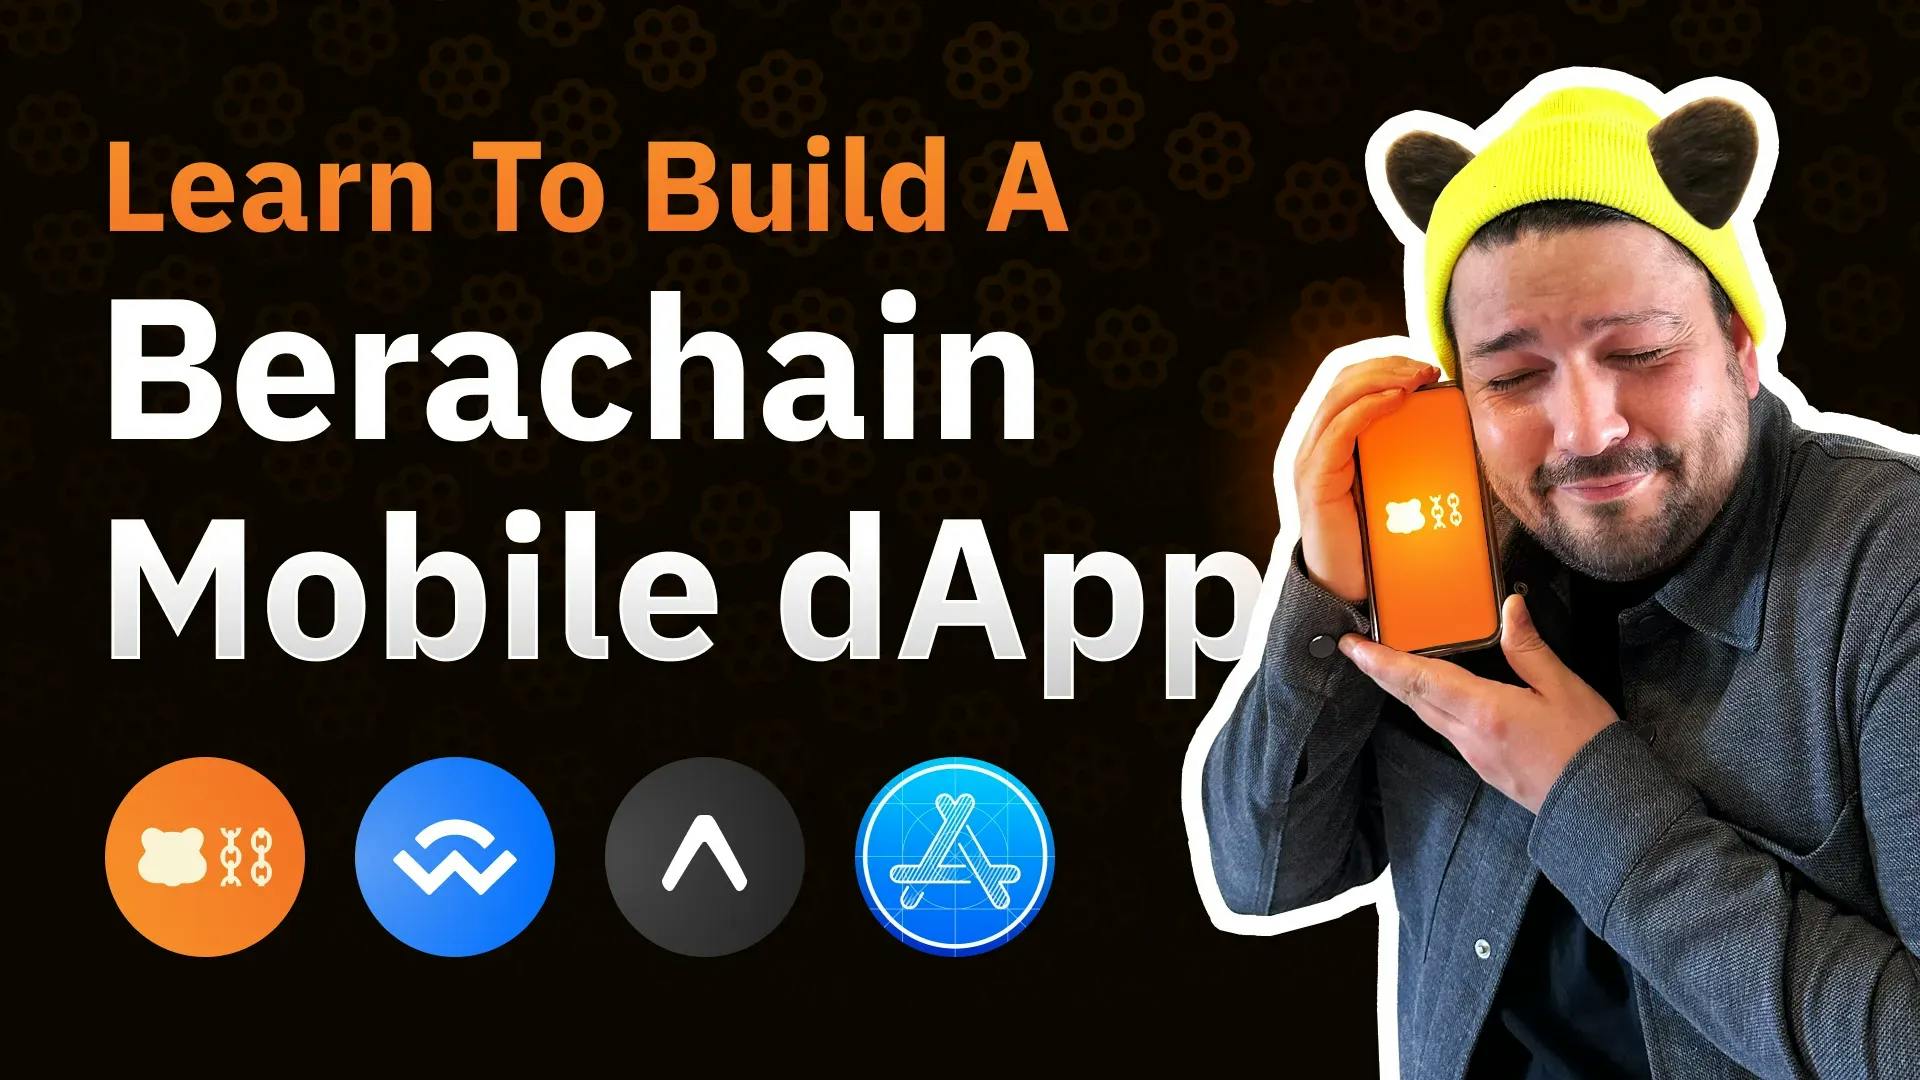 Build A Berachain Mobile dApp With WalletConnect & Expo